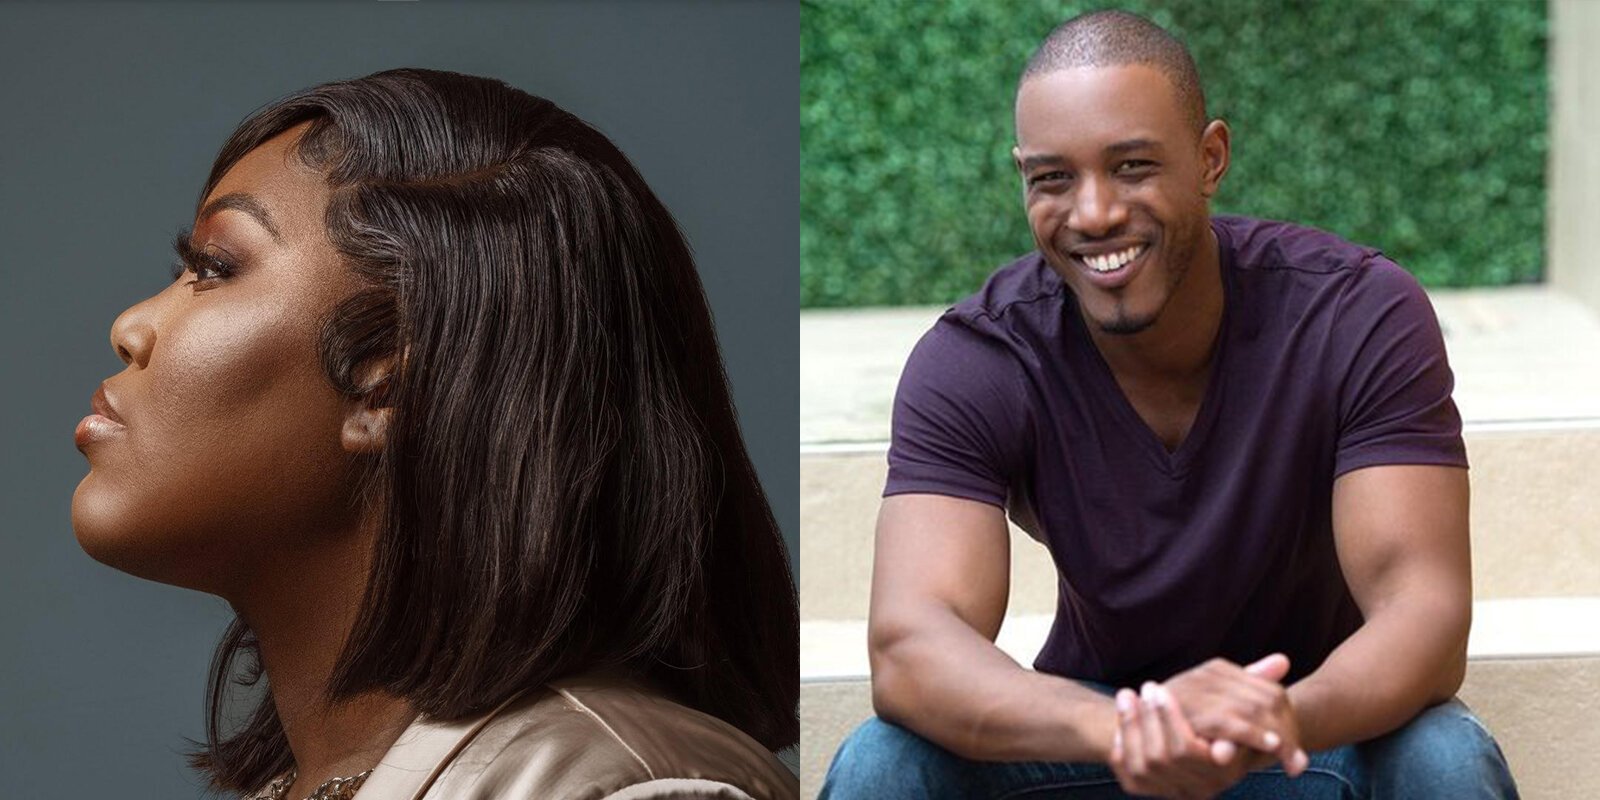 Authors Dorphise Jean and Greg Anderson Elysée will be the featured speakers at Heroic Futures.